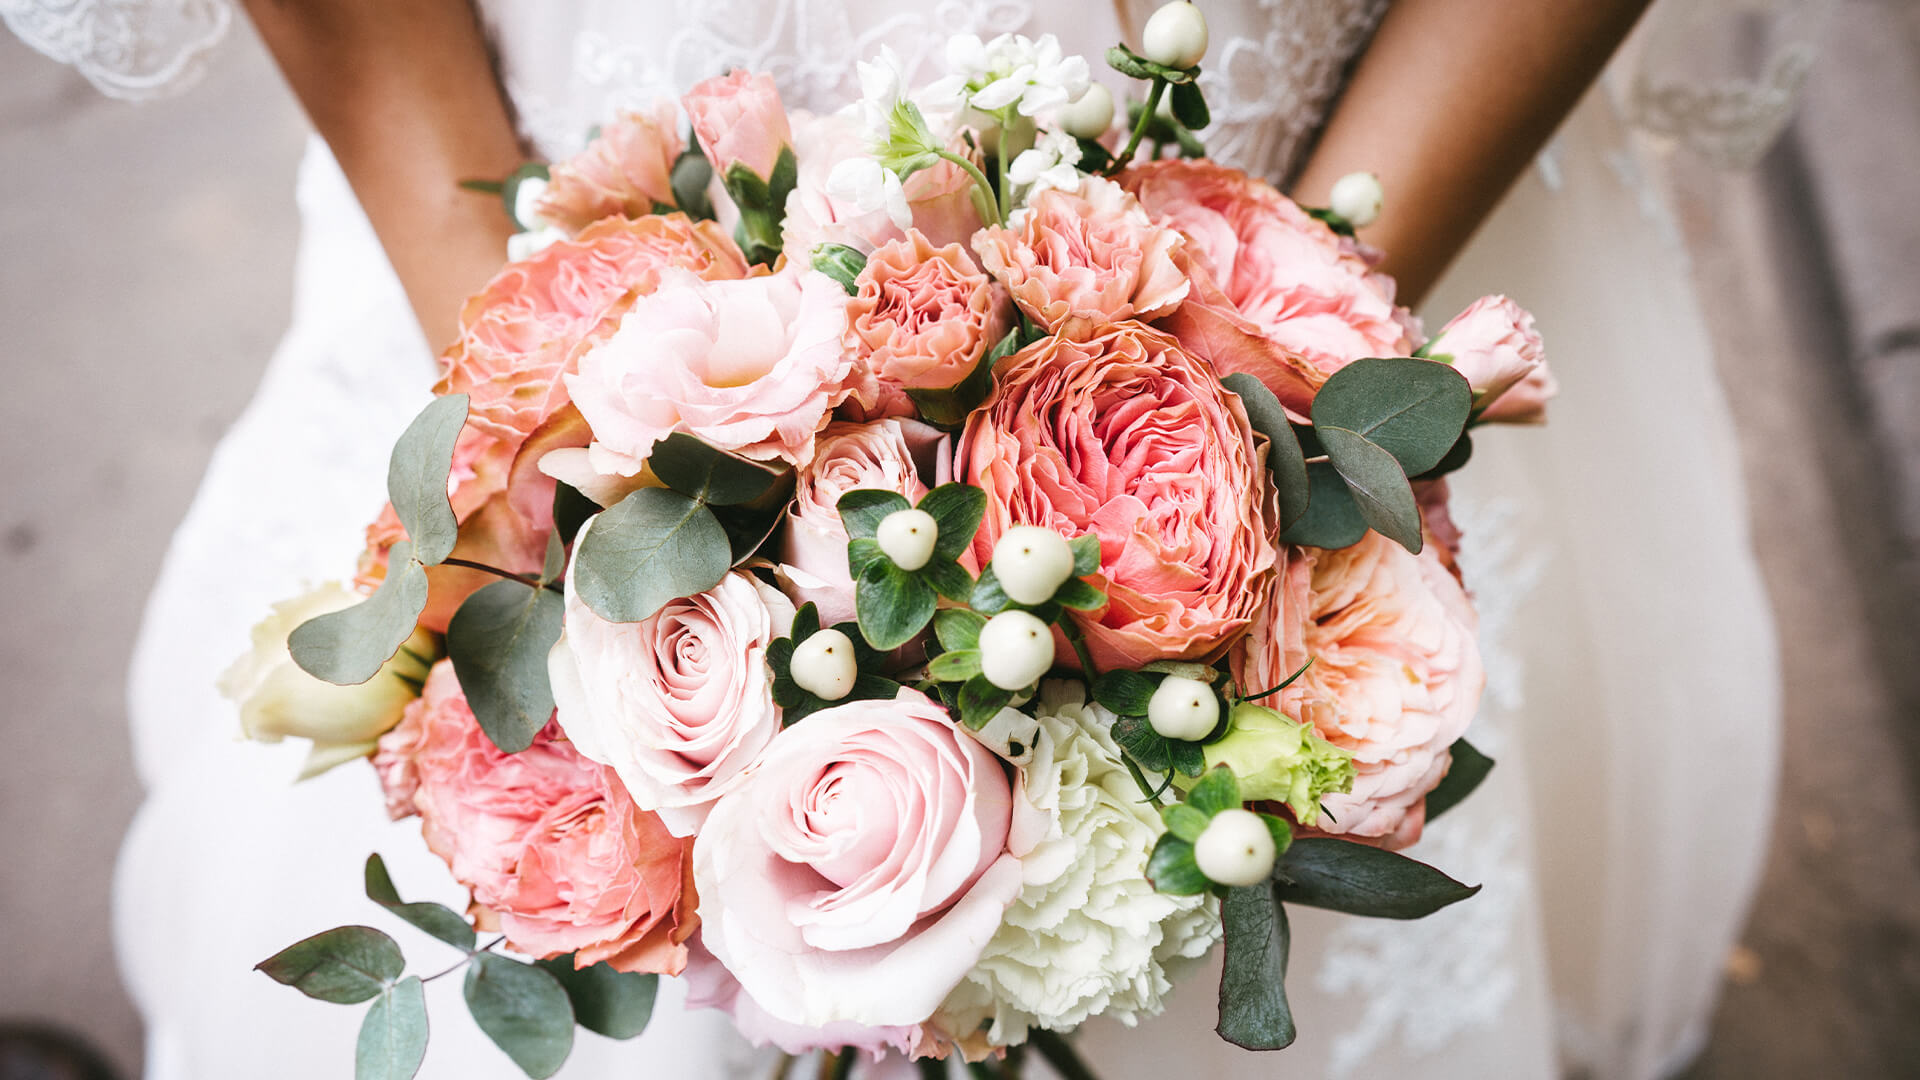 7 Tips for Choosing a Wedding Bouquet, According to an Expert - Lux Magazine